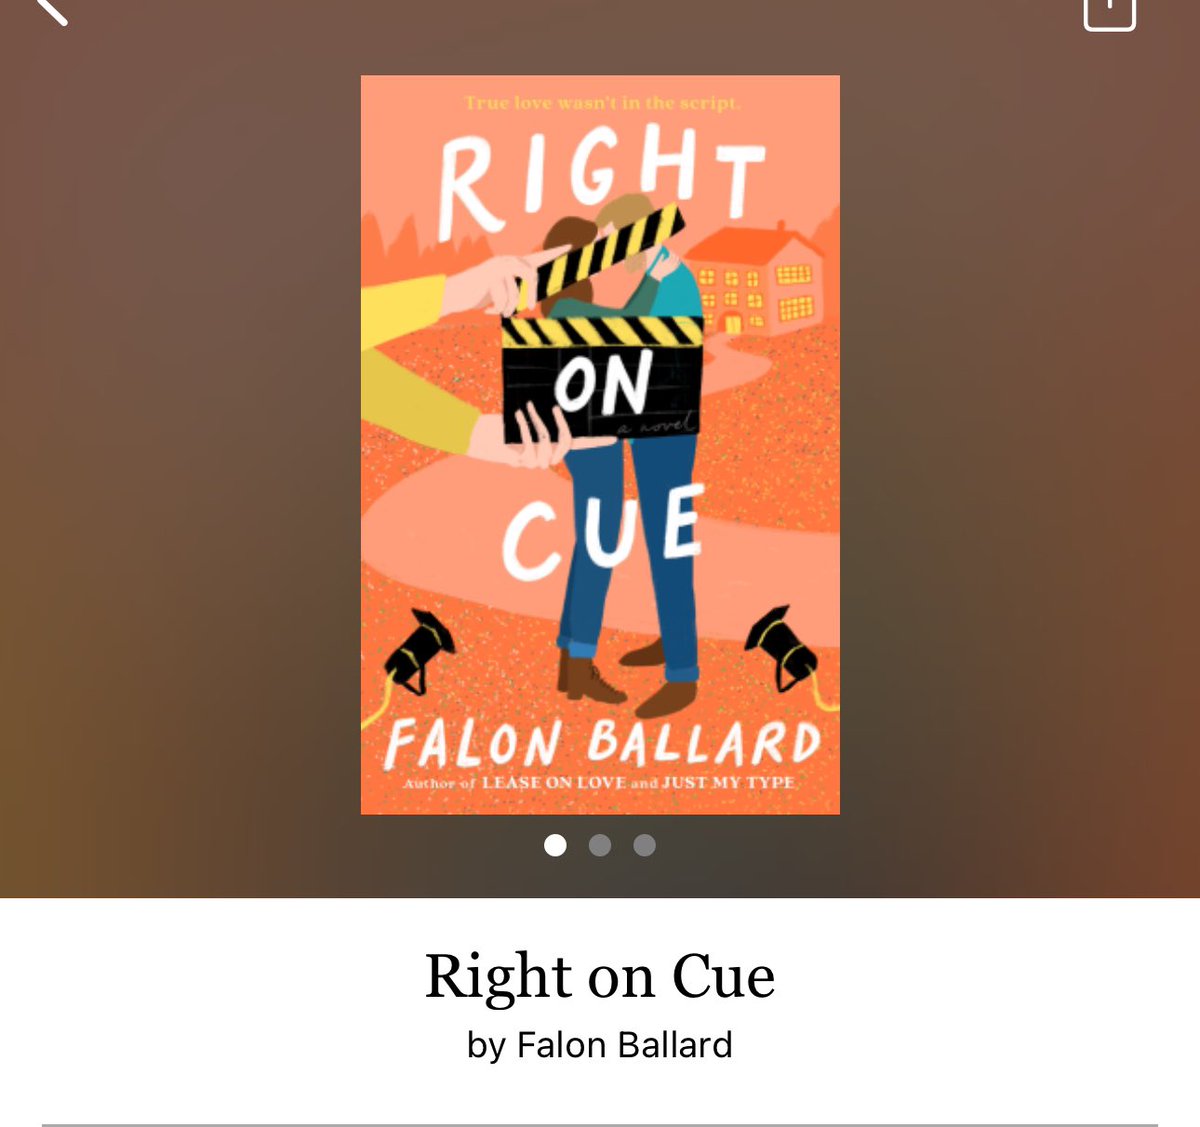 Right On Cue by Falon Ballard 

#RightOnCue by #FalonBallard #6313 #23chapters #336pages #462of400 #NewRelease #100for25 #10houraudiobook #EmmyAndGrayson #audiobook #april2024 #clearingoffreadingshelves #whatsnext #readitquick